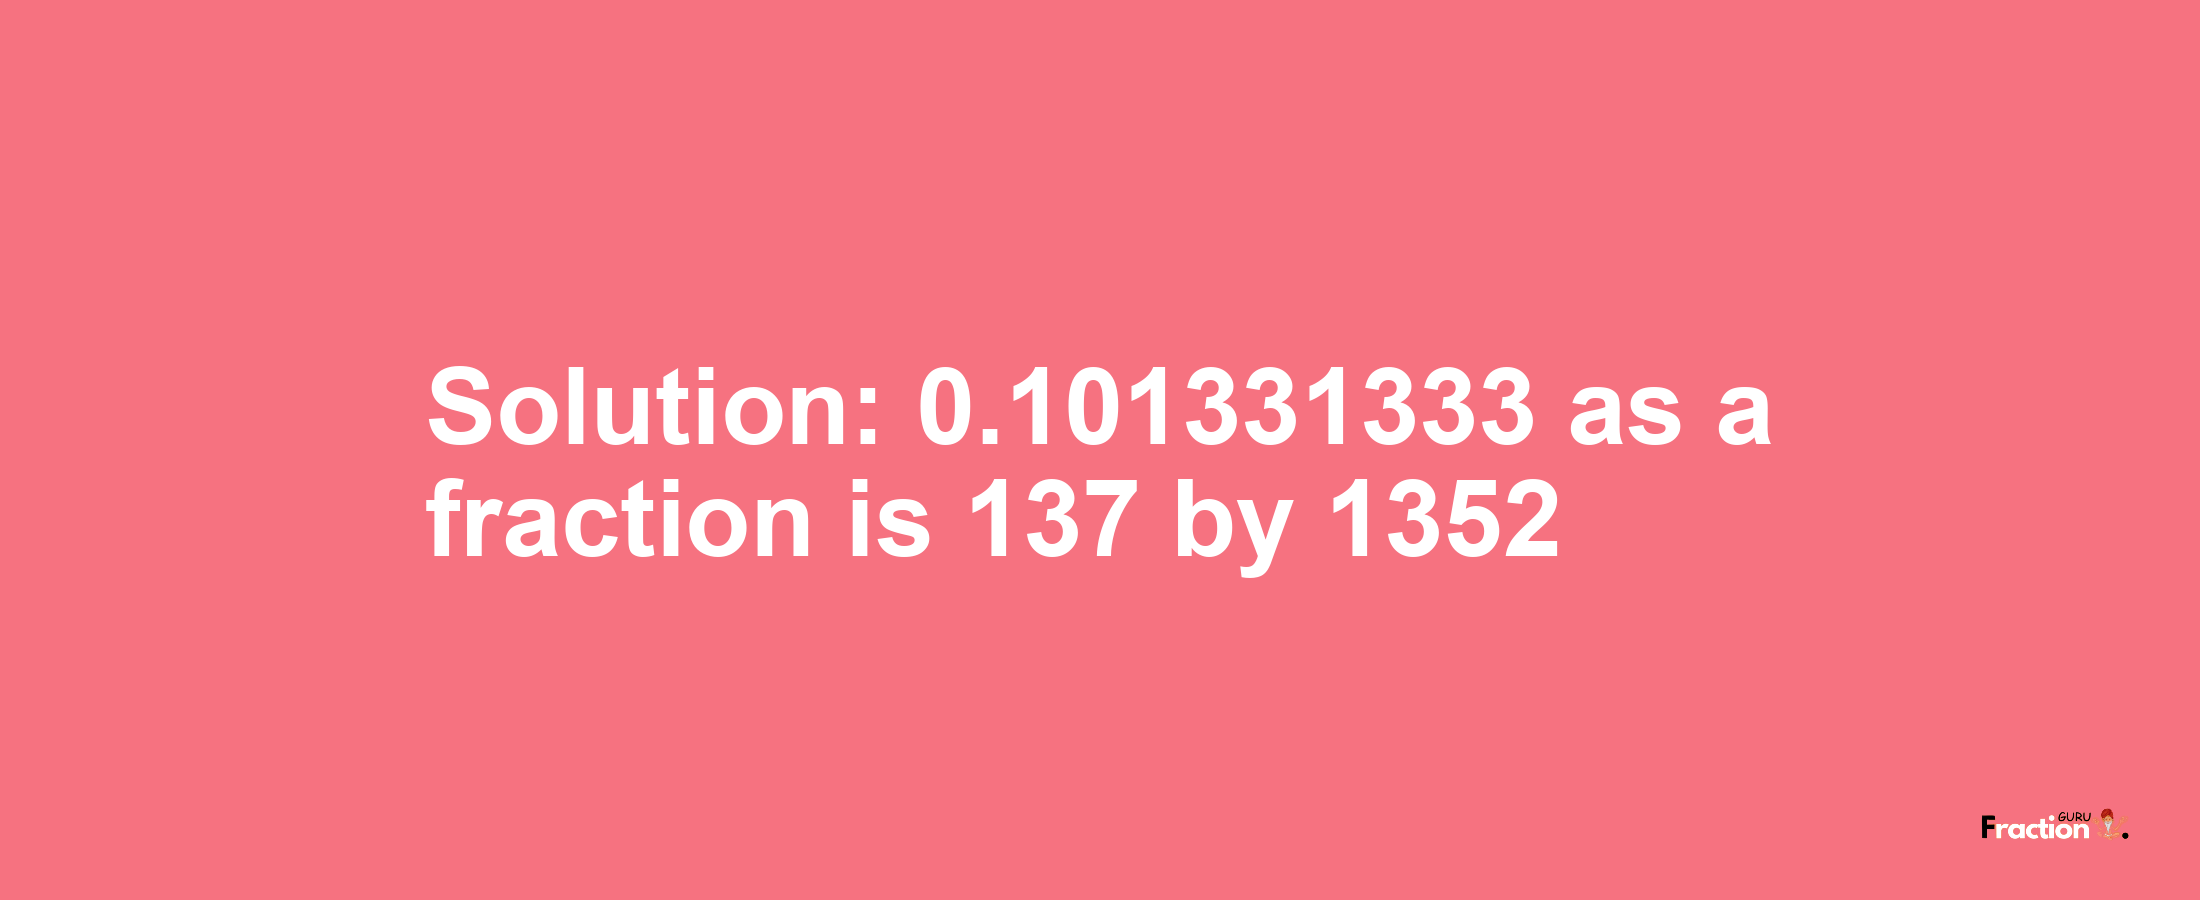 Solution:0.101331333 as a fraction is 137/1352